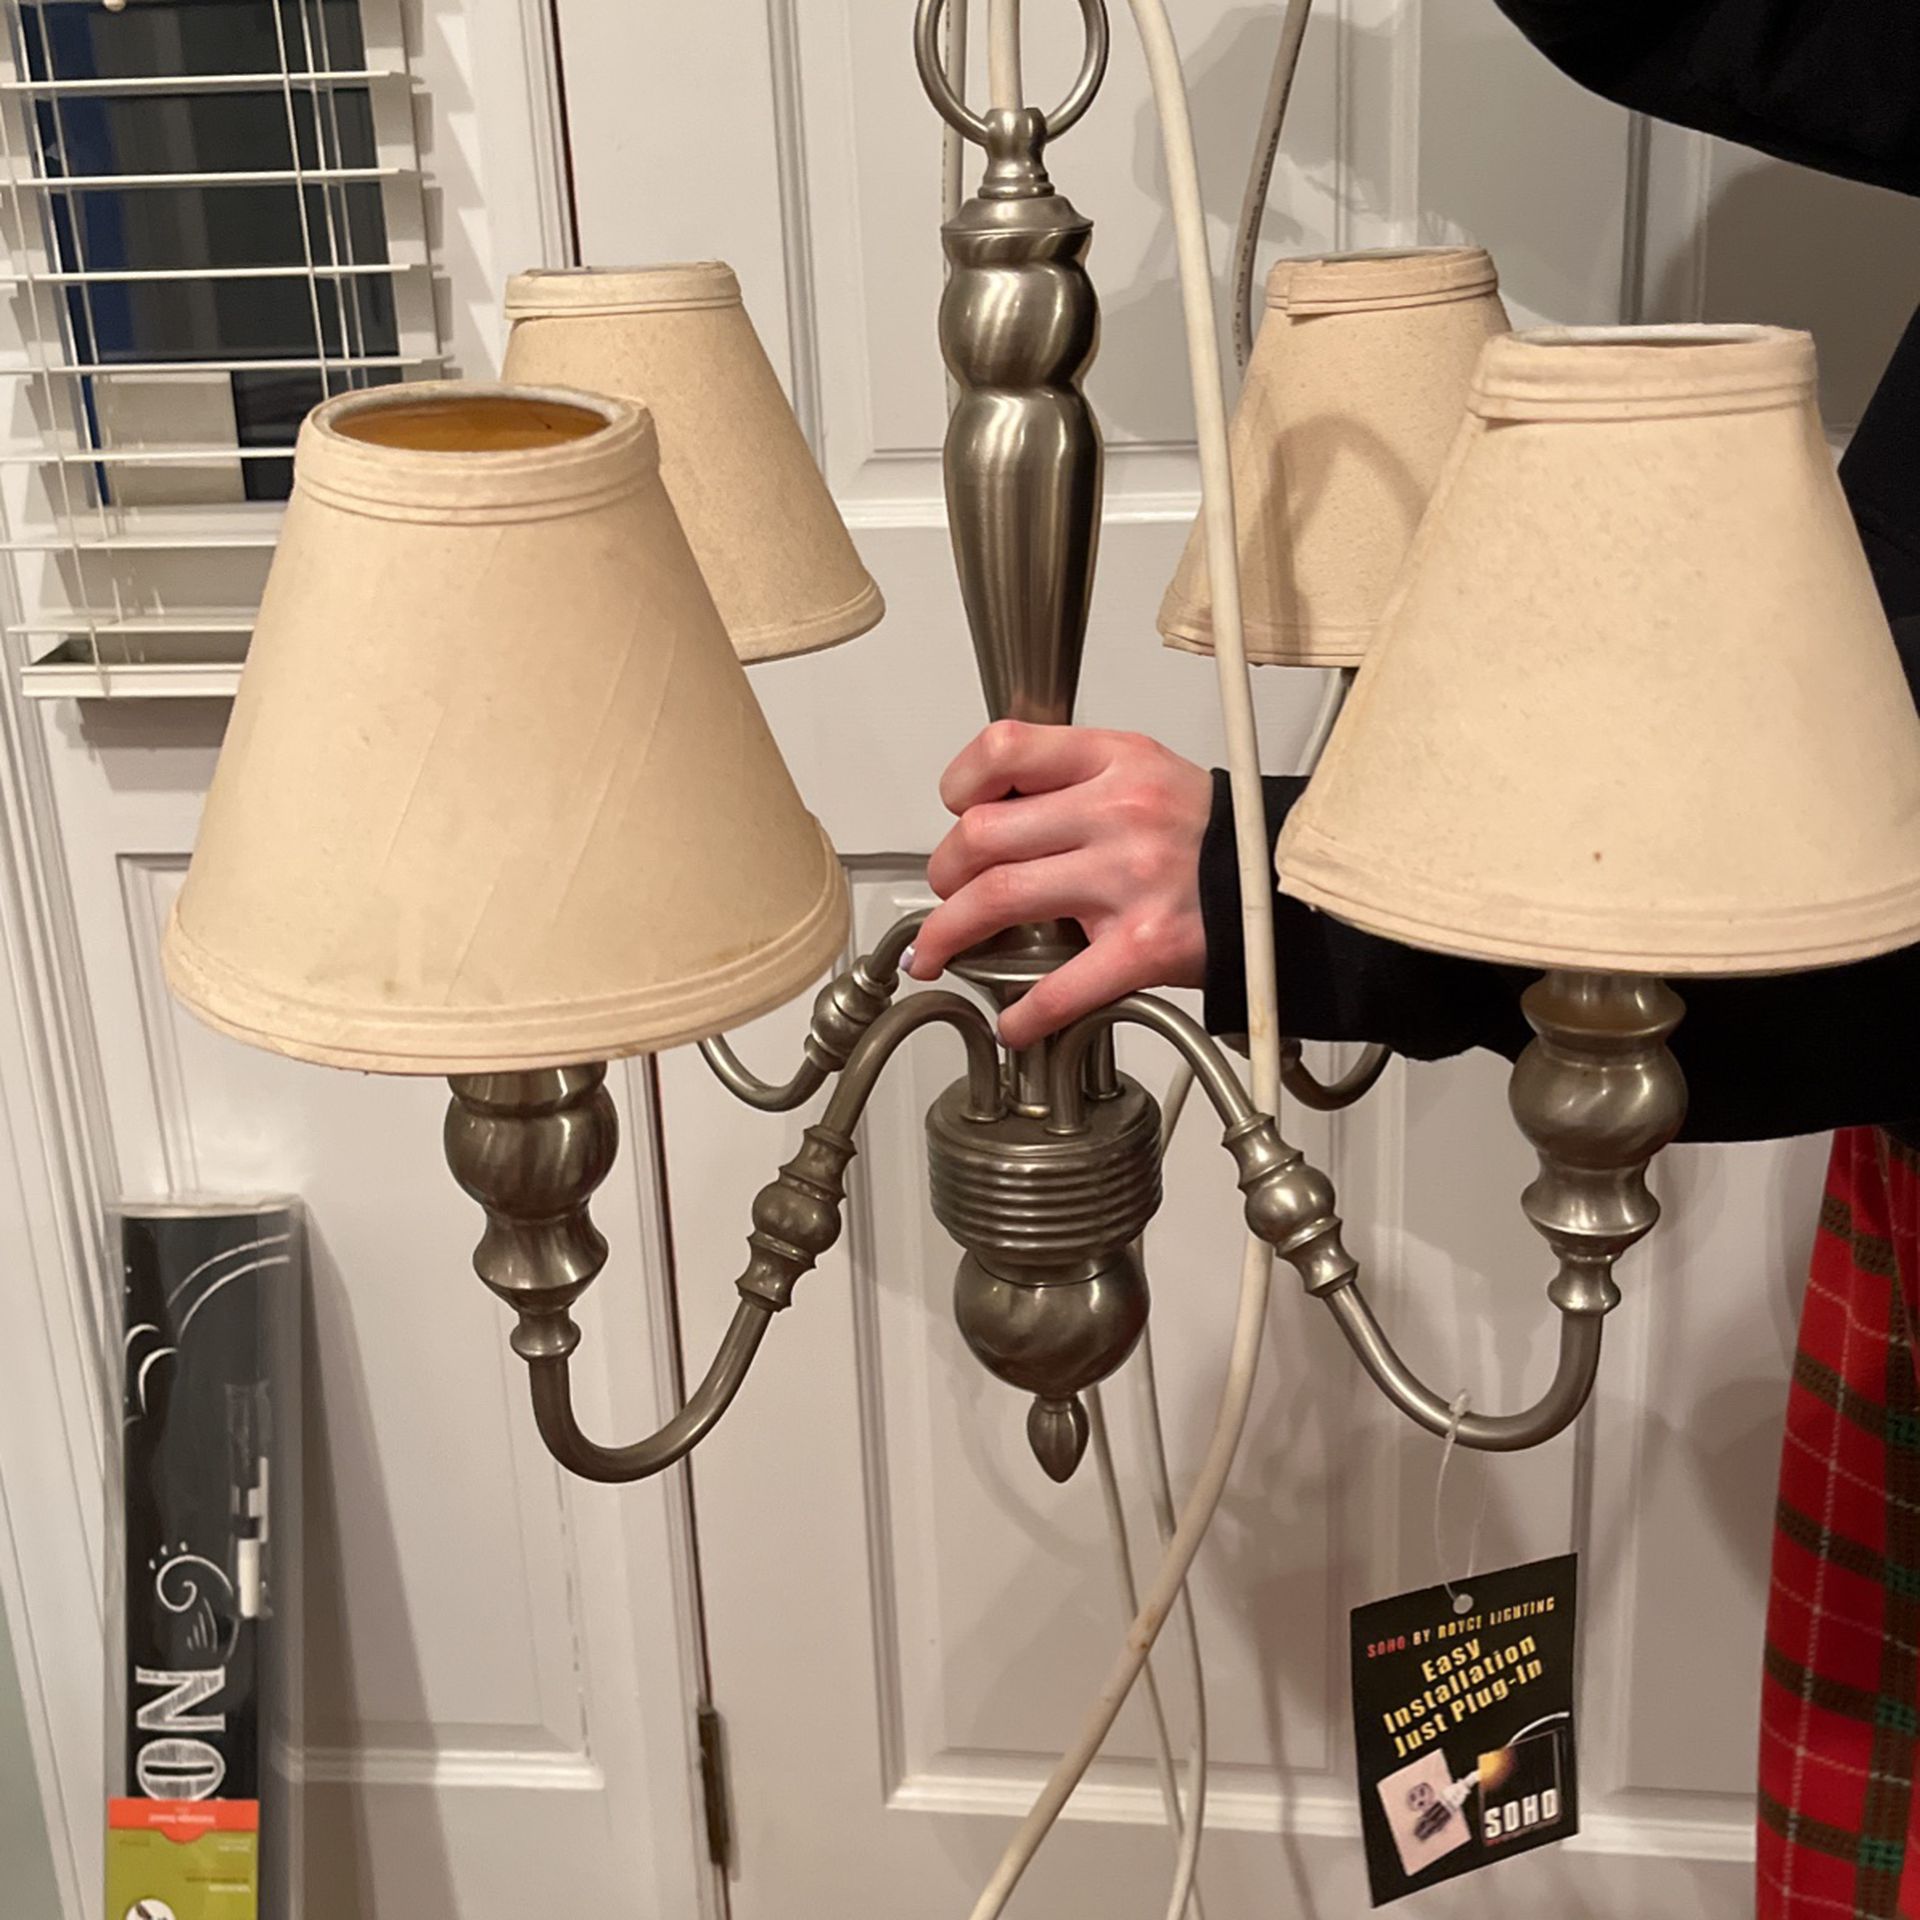 Small Nickel Chandelier Brand New Never Used $20